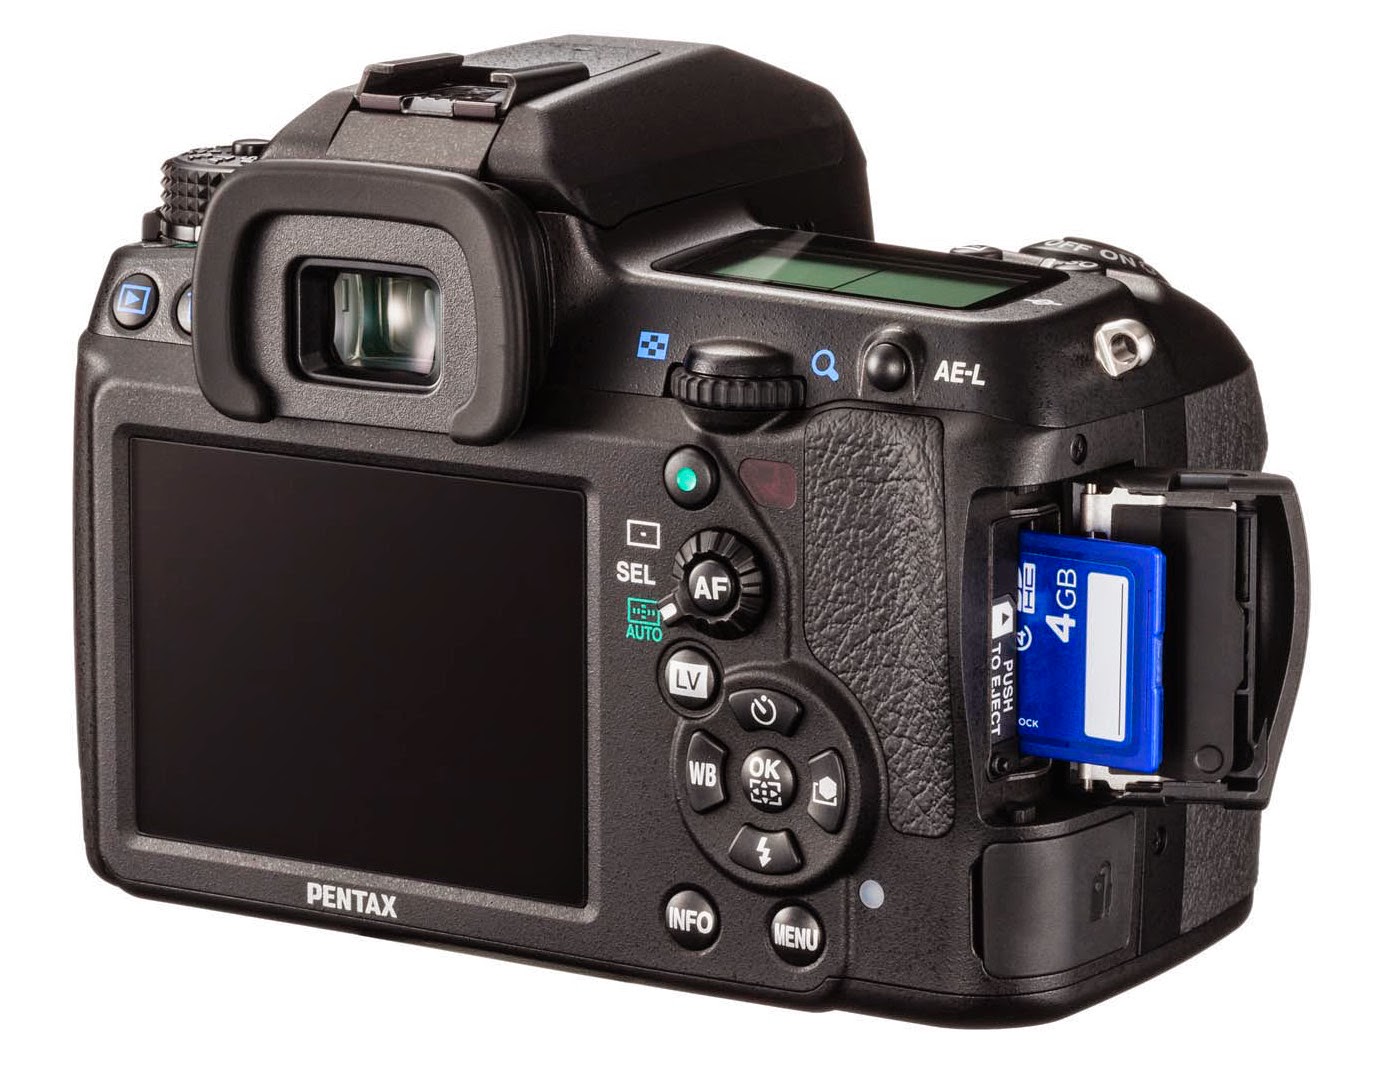 PHOTOGRAPHIC CENTRAL: Pentax K5IIs Review